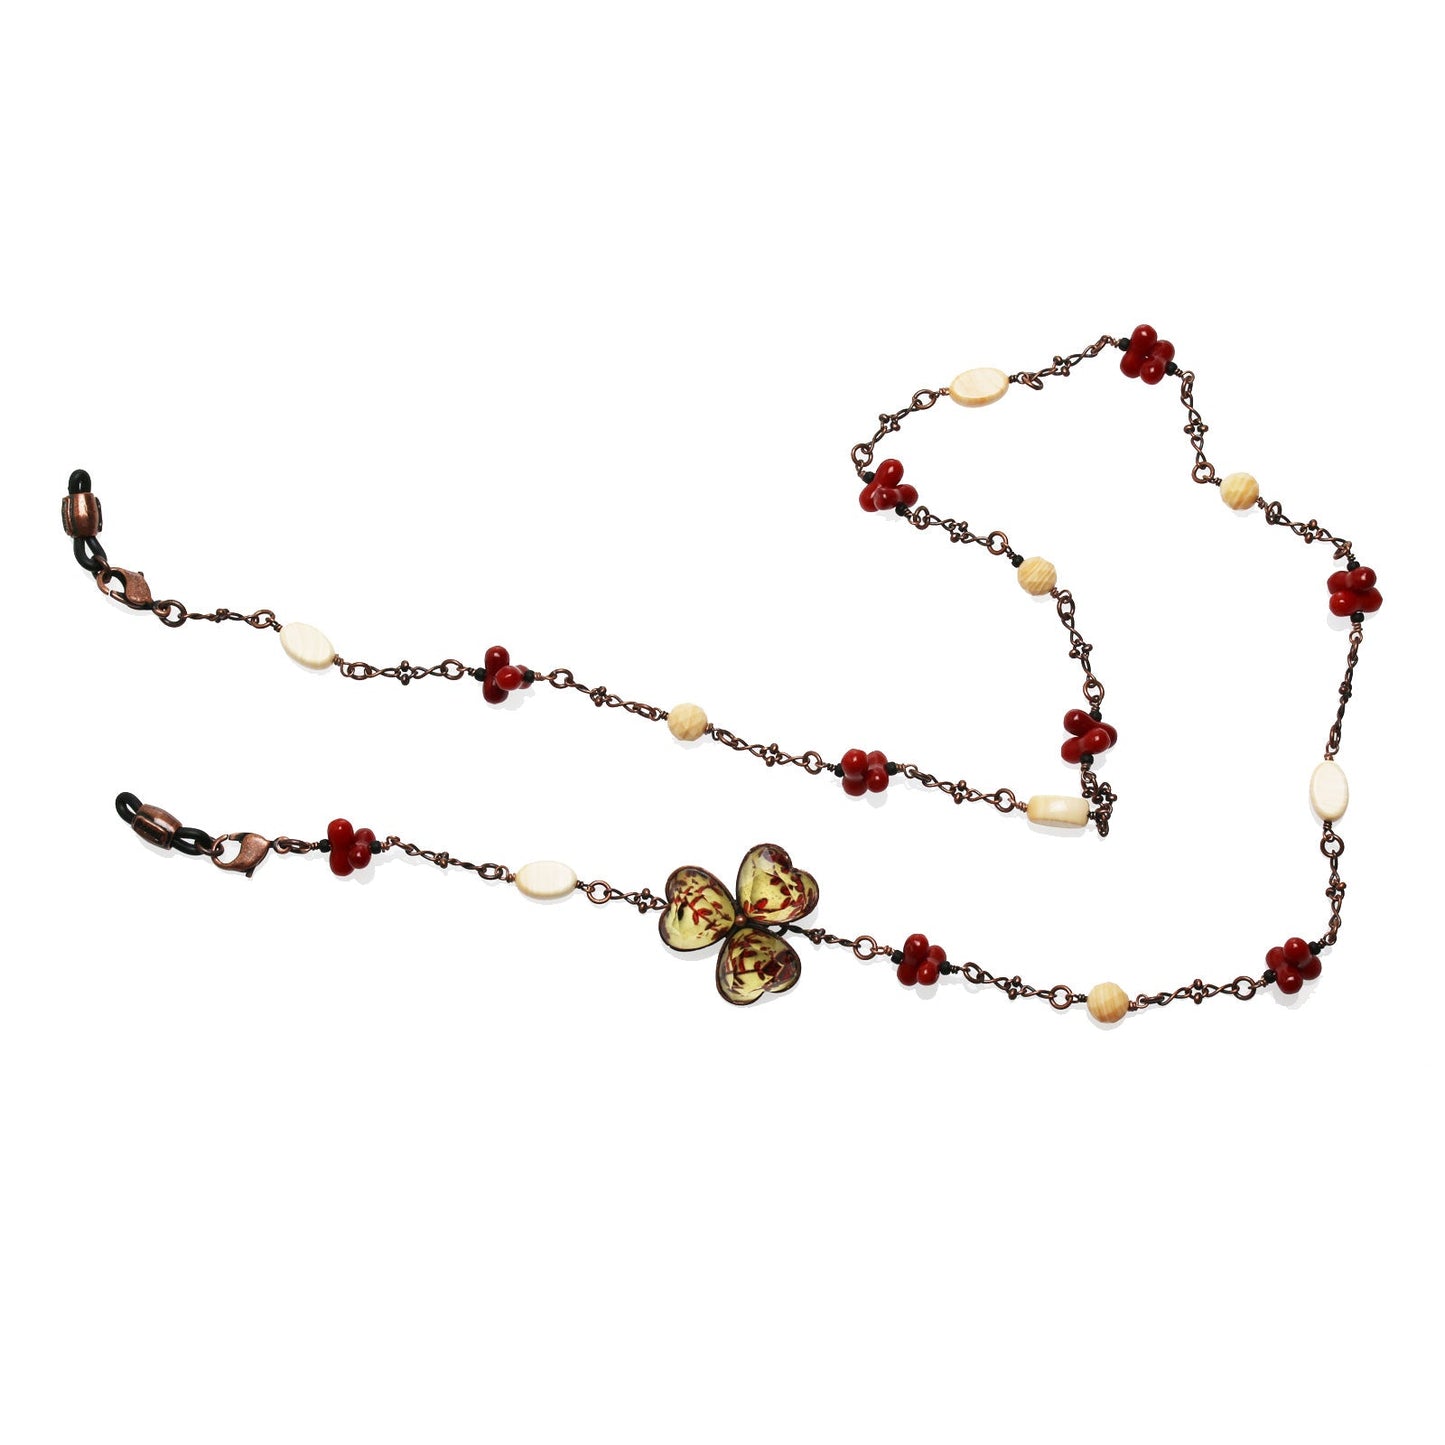 Glasses Chain Necklace Coral Red Flower TAMARUSAN